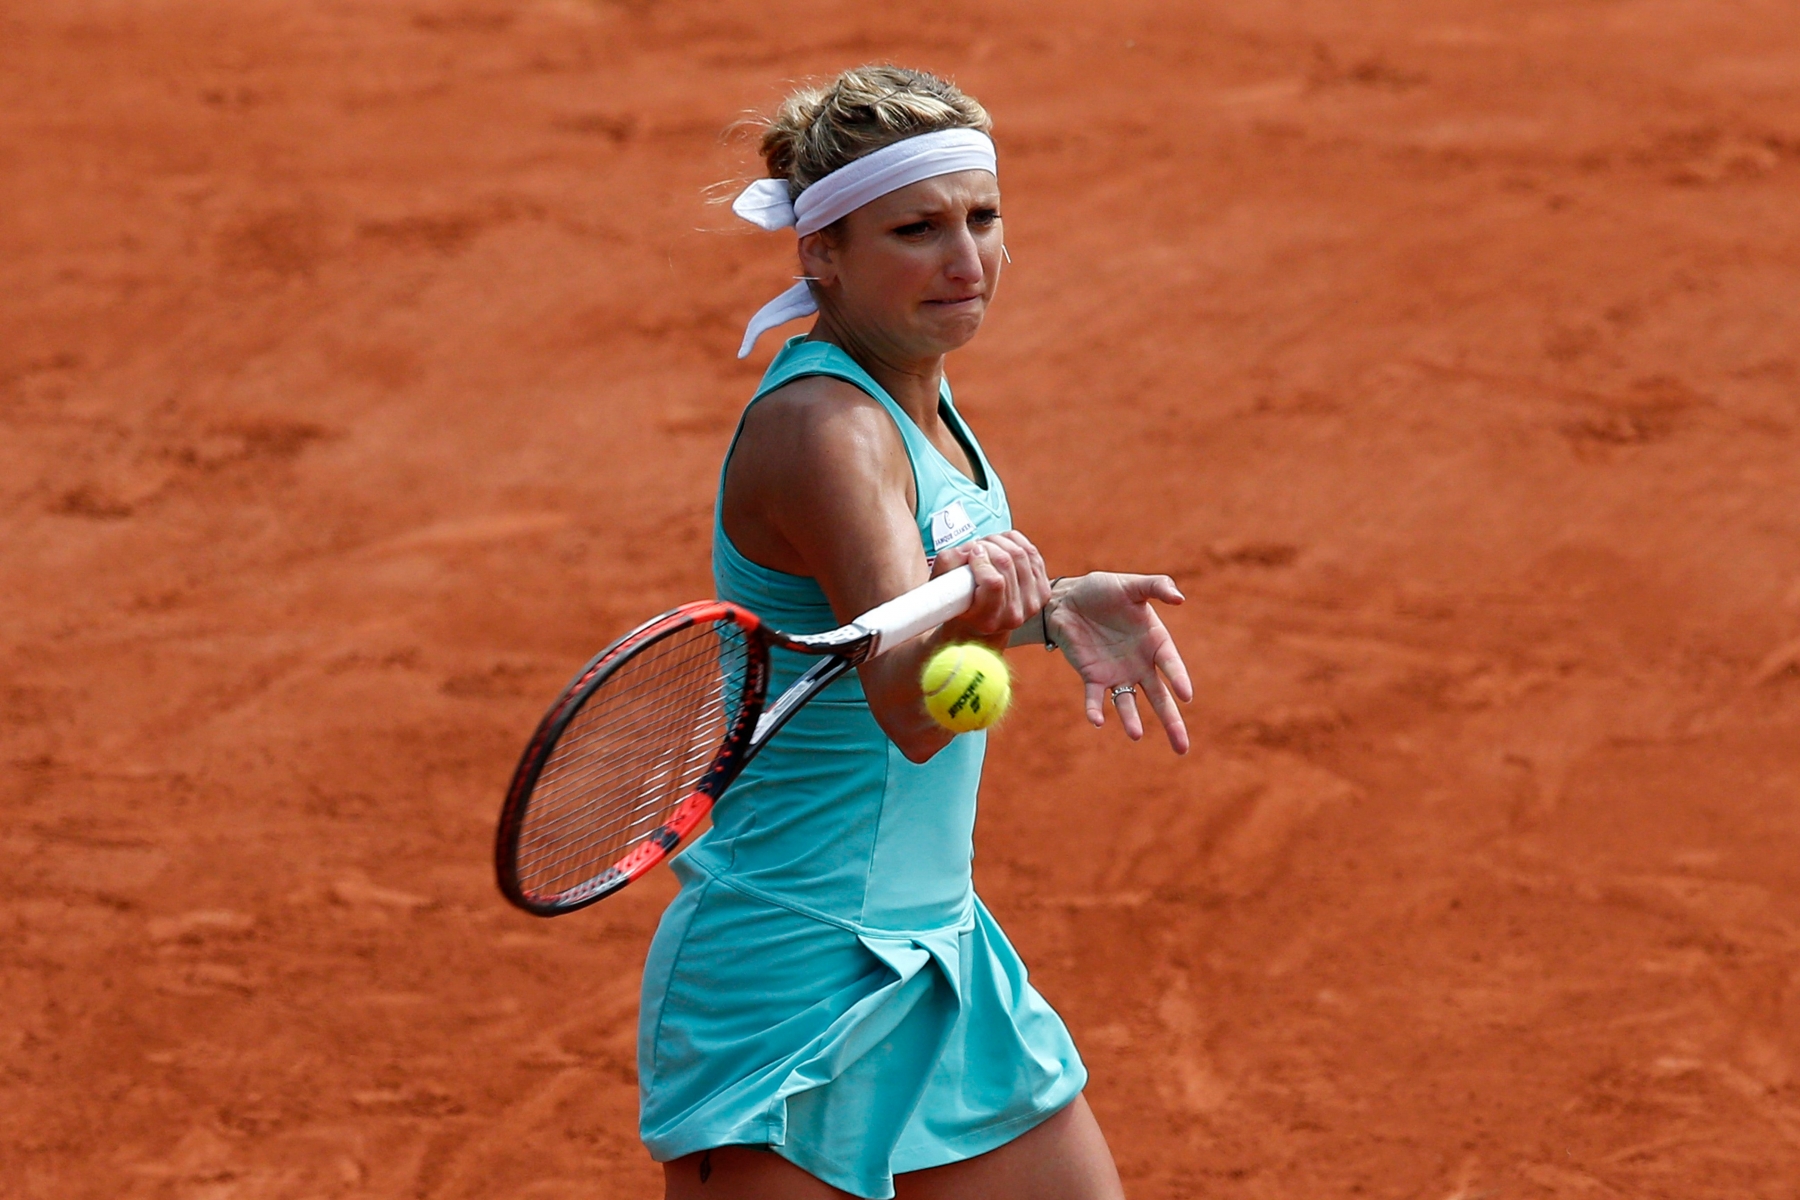 Timea Bacsinszky of Switzerland returns the ball to France's Pauline Parmentier during their third round match of the French Open tennis tournament at the Roland Garros stadium, Saturday, May 28, 2016 in Paris.  (AP Photo/Christophe Ena) France Tennis French Open